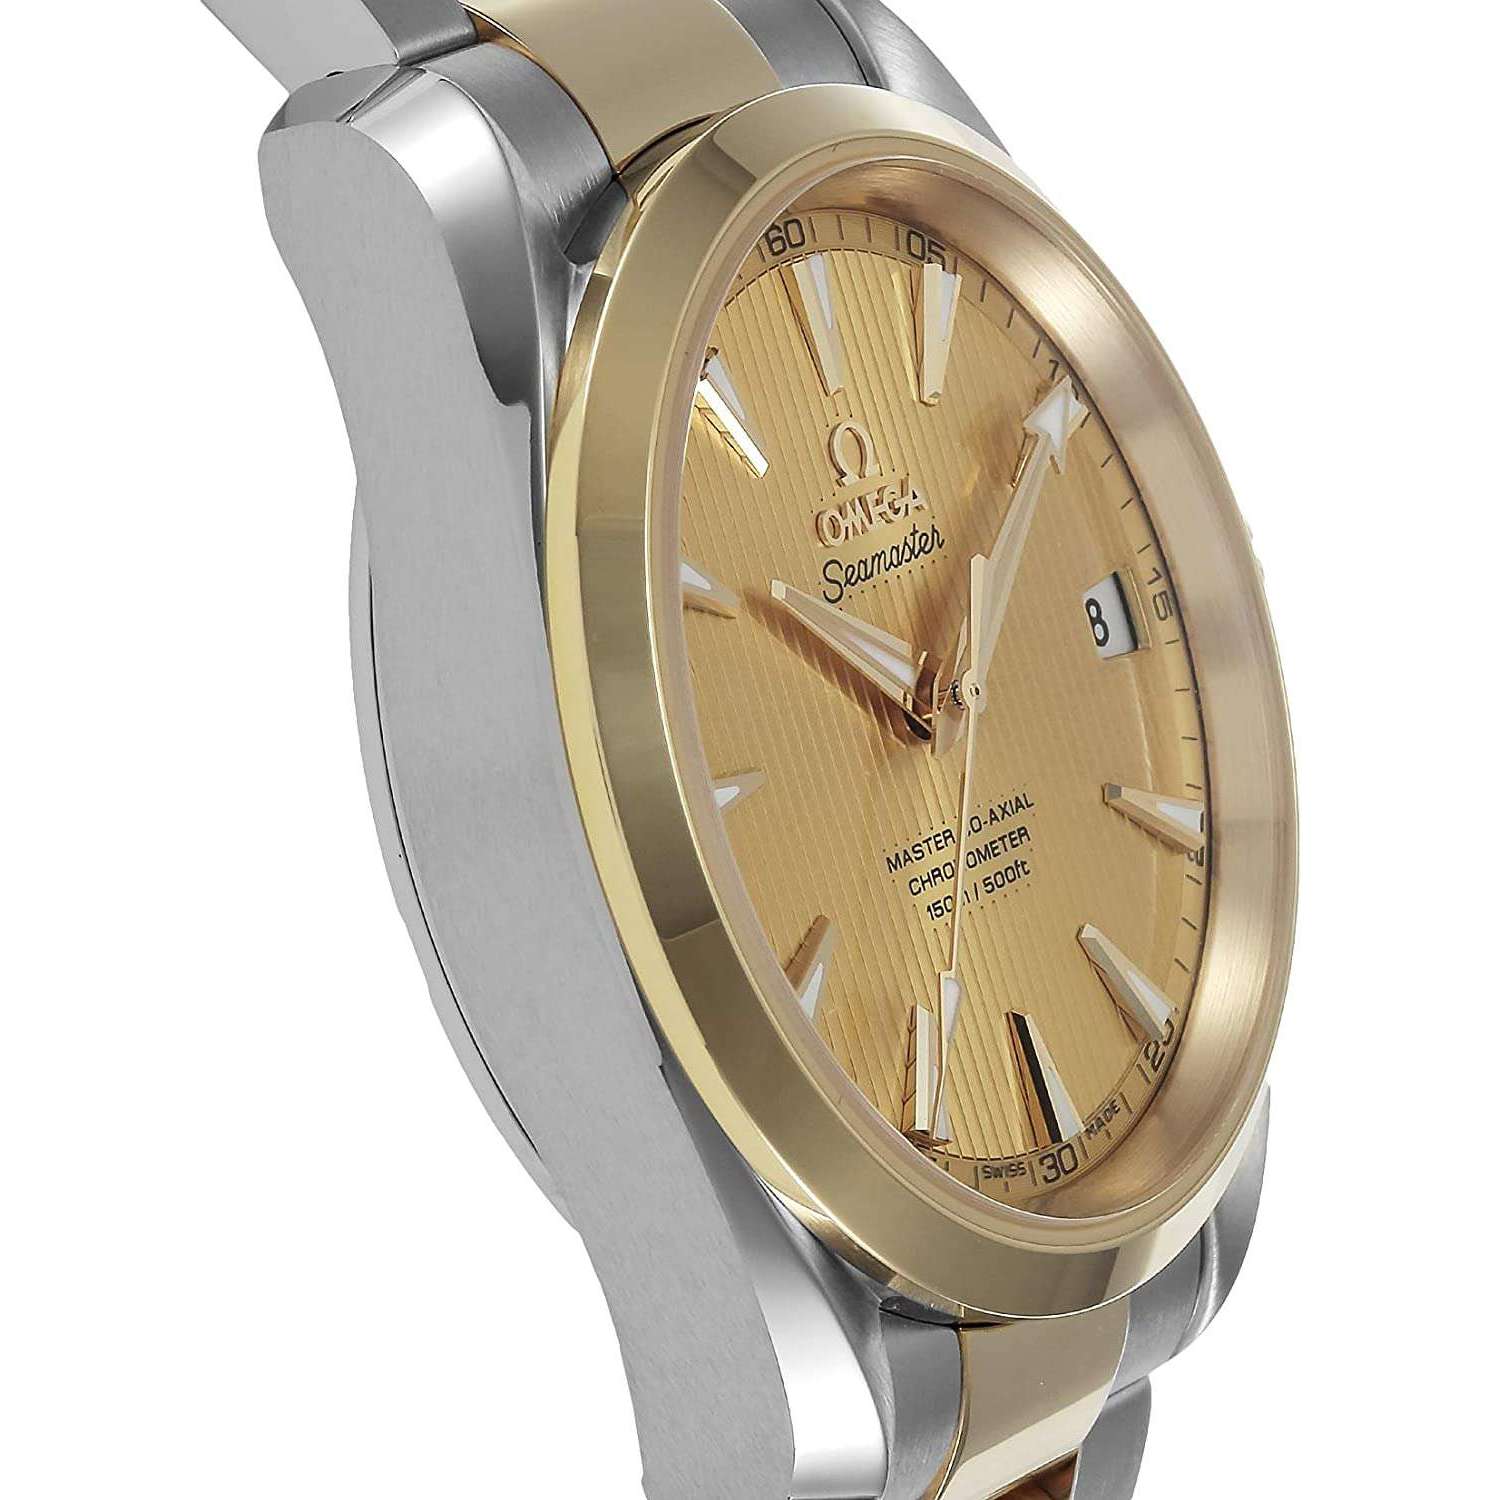 ROOK JAPAN:OMEGA SEAMASTER MASTER CO-AXIAL CHRONOMETER 38.5 MM MEN WATCH 231.20.39.21.08.001,Luxury Watch,Omega